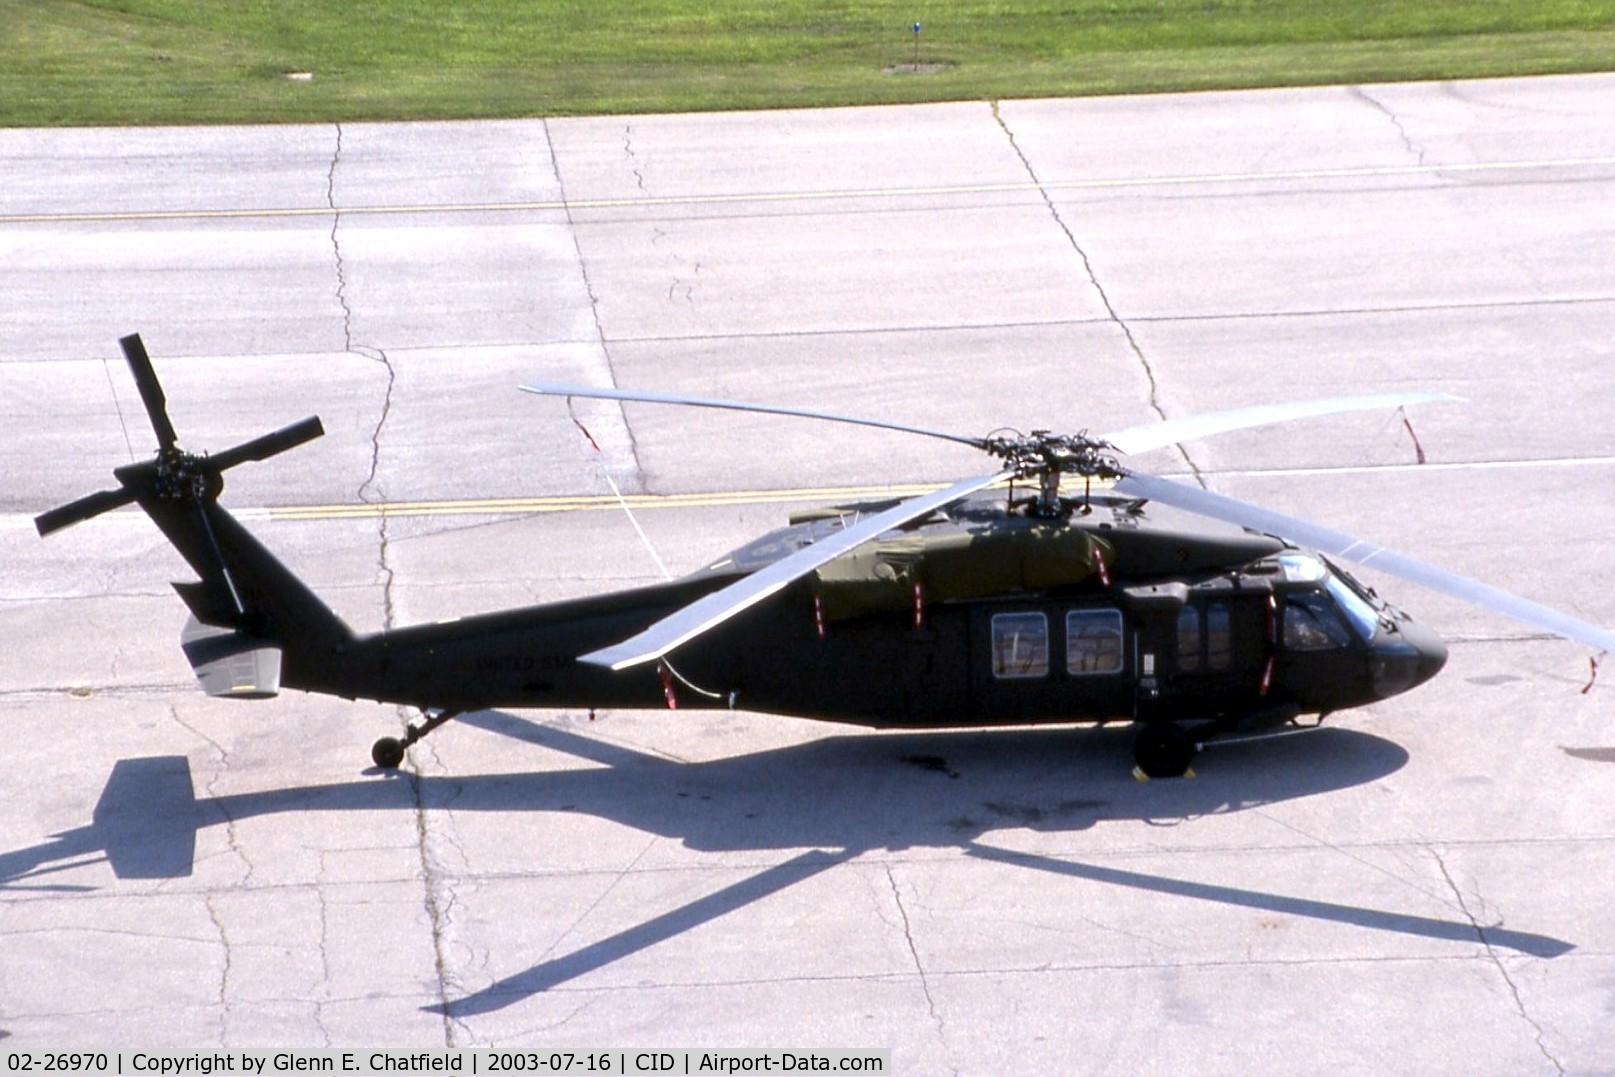 02-26970, 2002 Sikorsky UH-60L Black Hawk C/N 702782, UH-60L stopping over, seen from the control tower